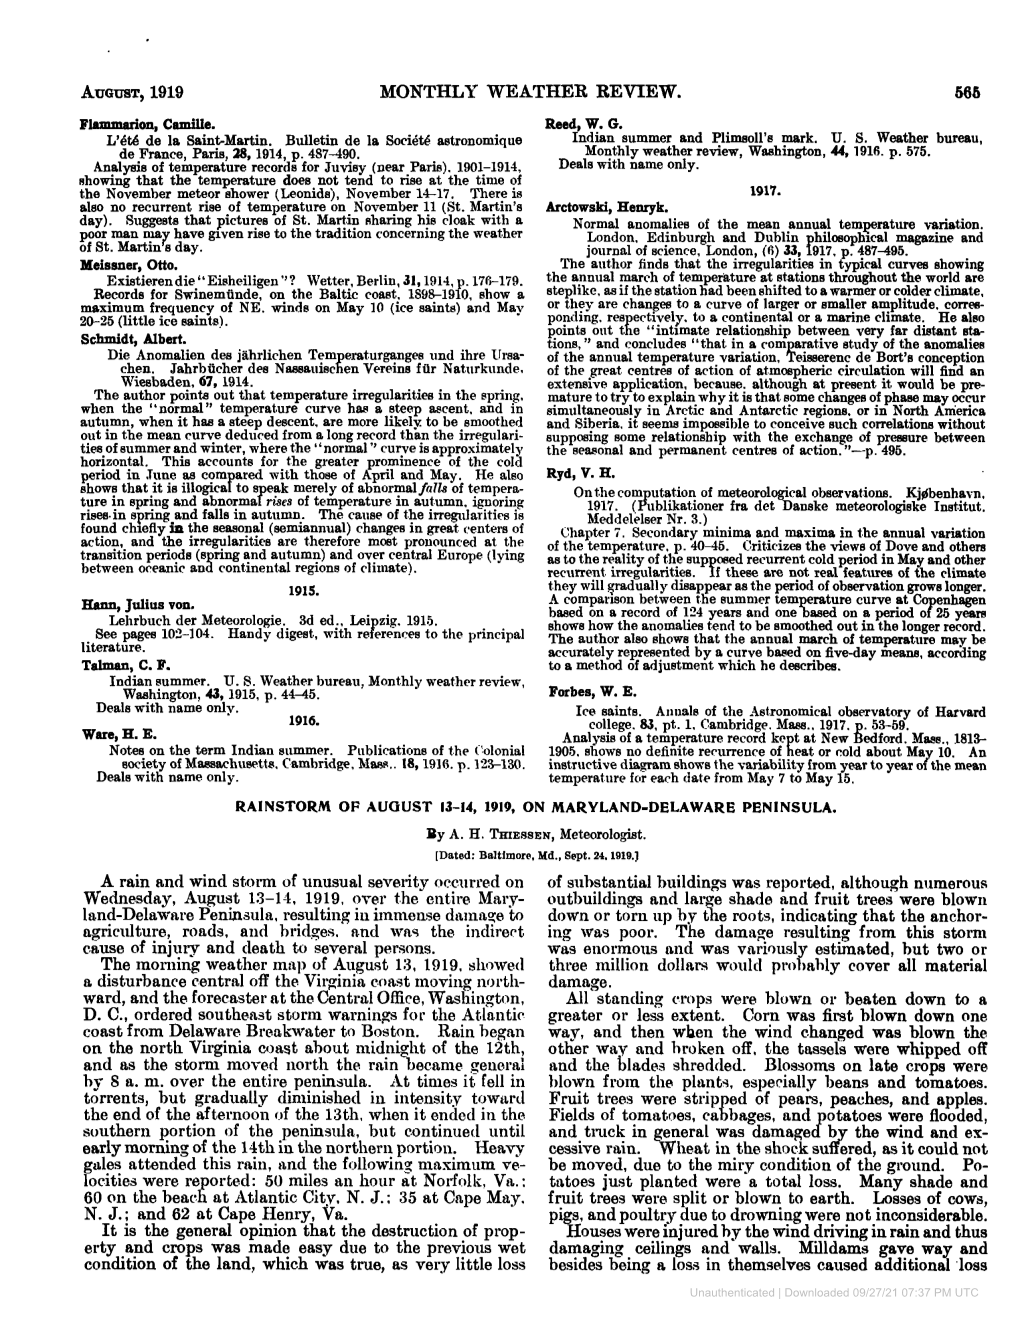 August, 1919 Monthly Weather Review